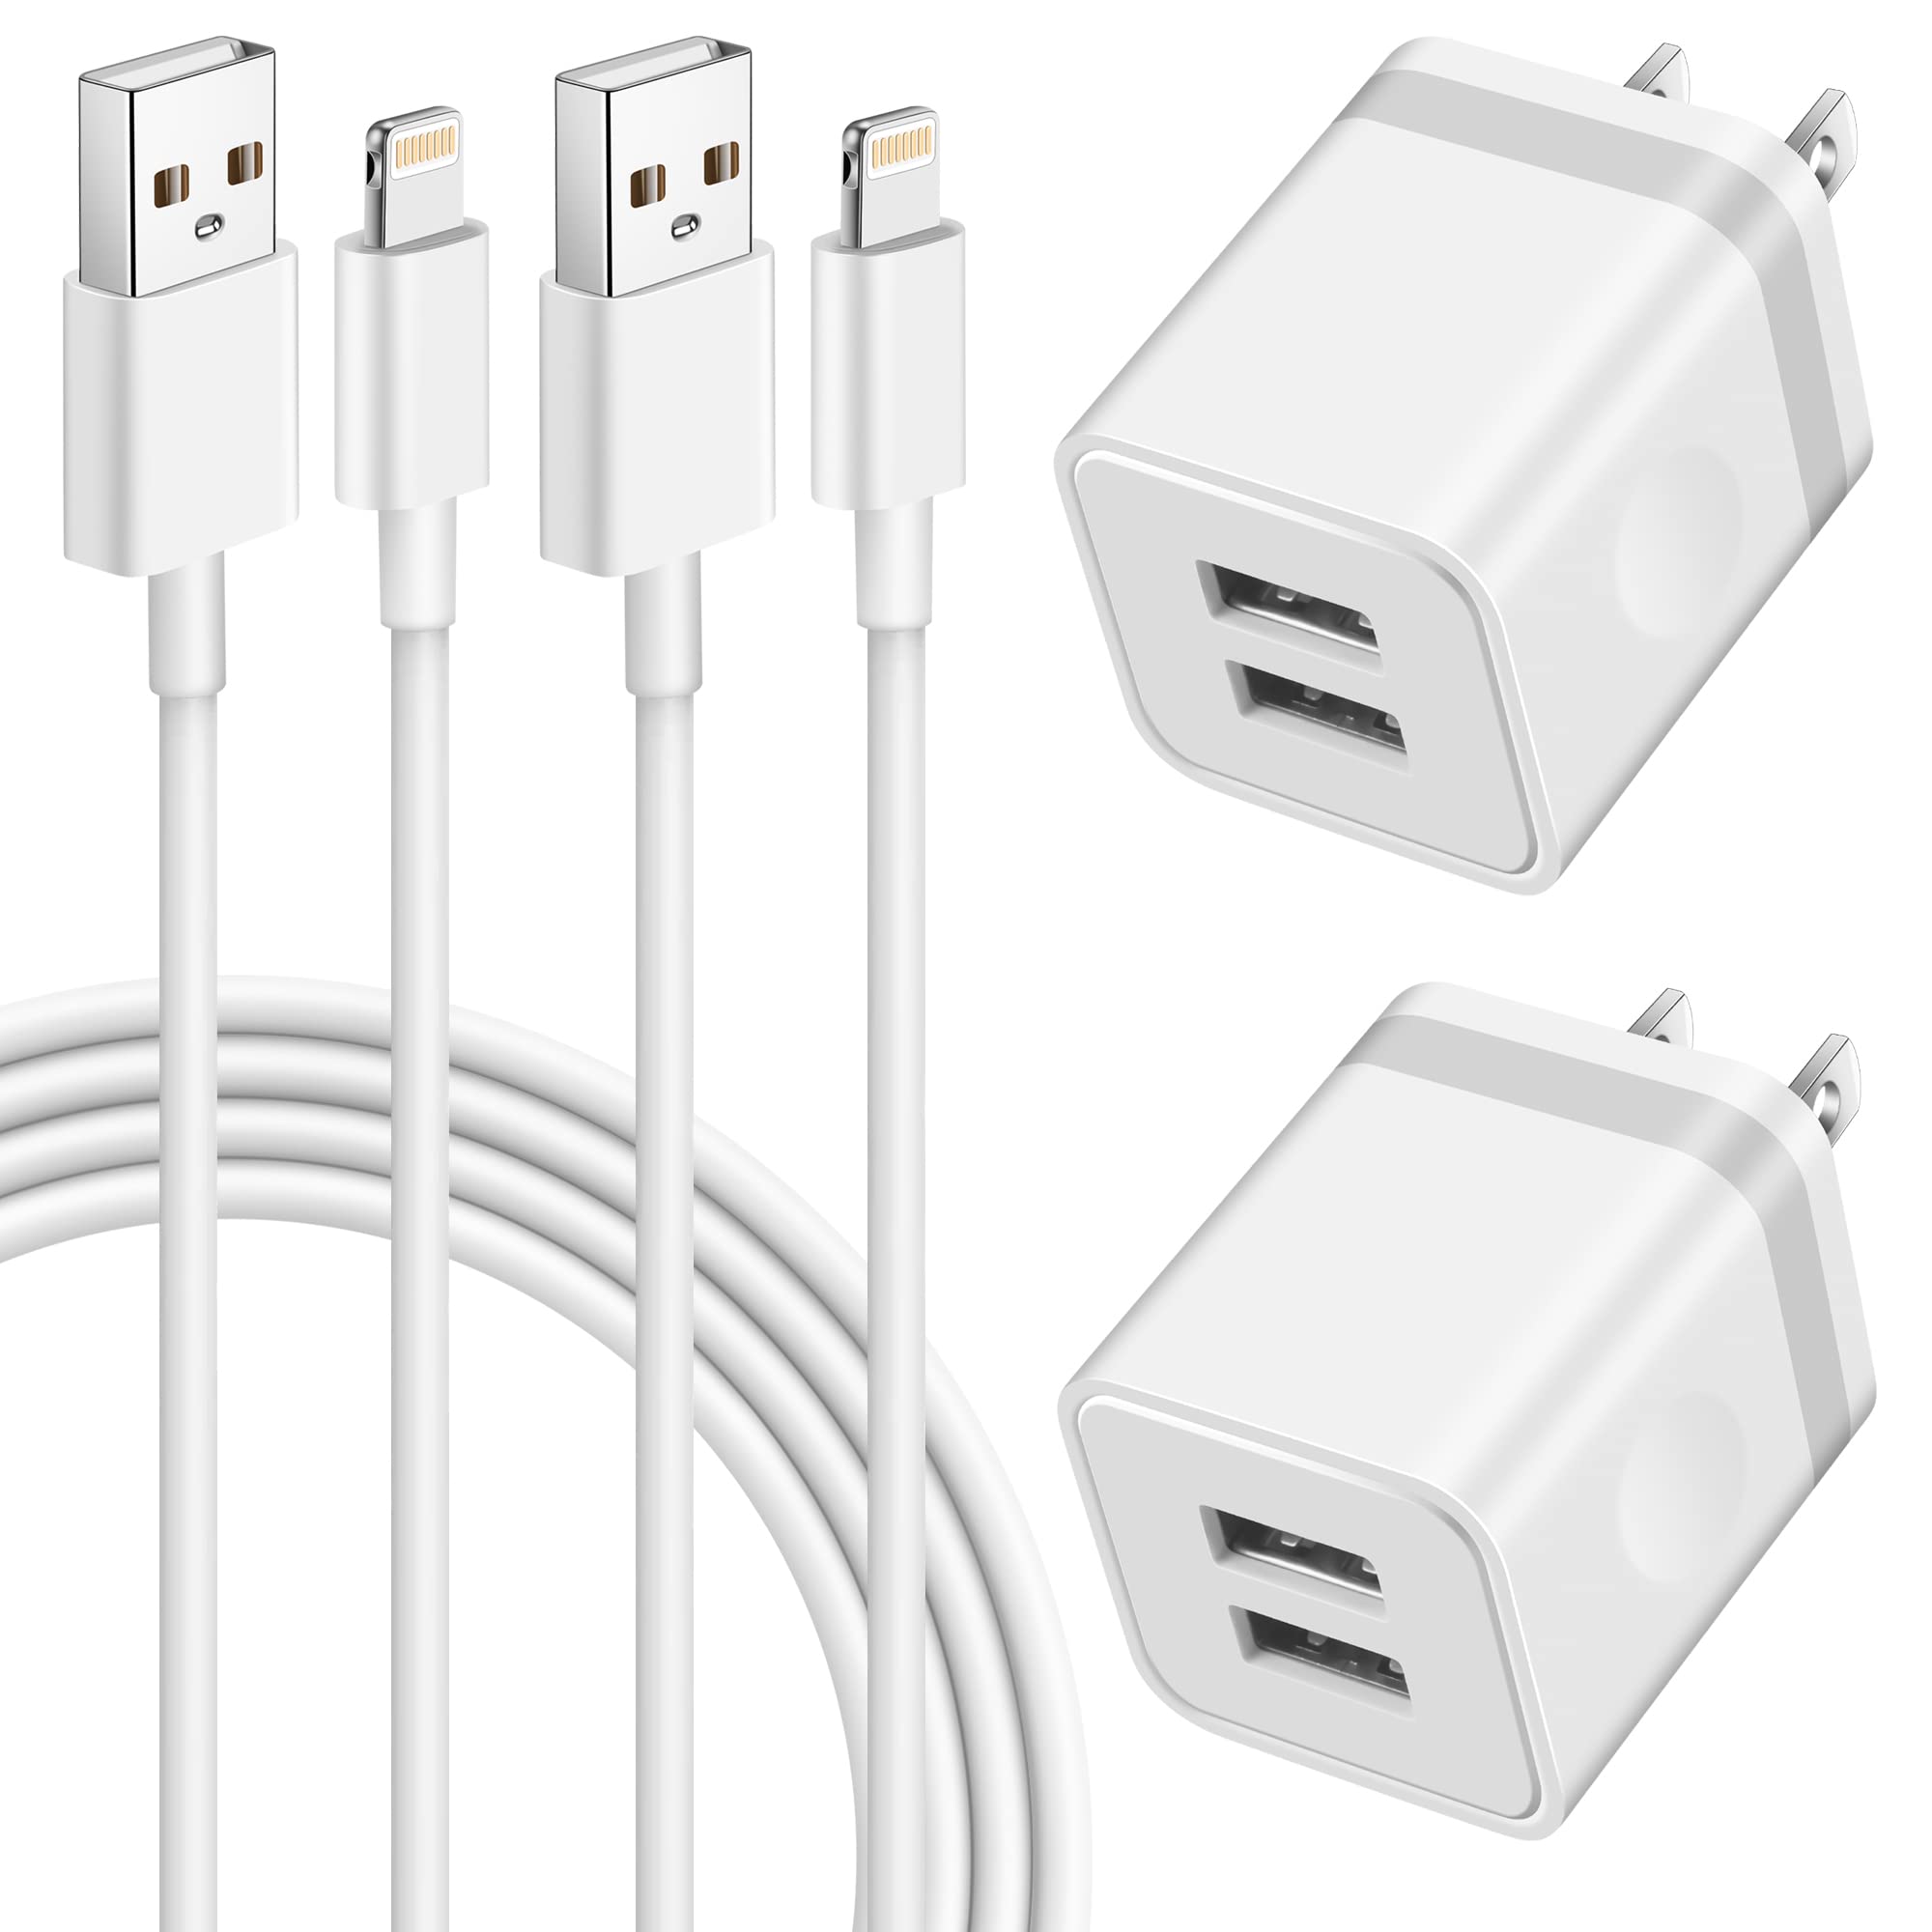 iPhone Charger [MFi Certified], LUOSIKE 2-Pack 10FT iPhone Charger Cord Long Charging Cable + 2 X Dual USB Wall Charger Block Plug Adapter Cube for iPhone 13 12 Pro Max 11 XS XR X 8 7 6 Plus SE, iPad